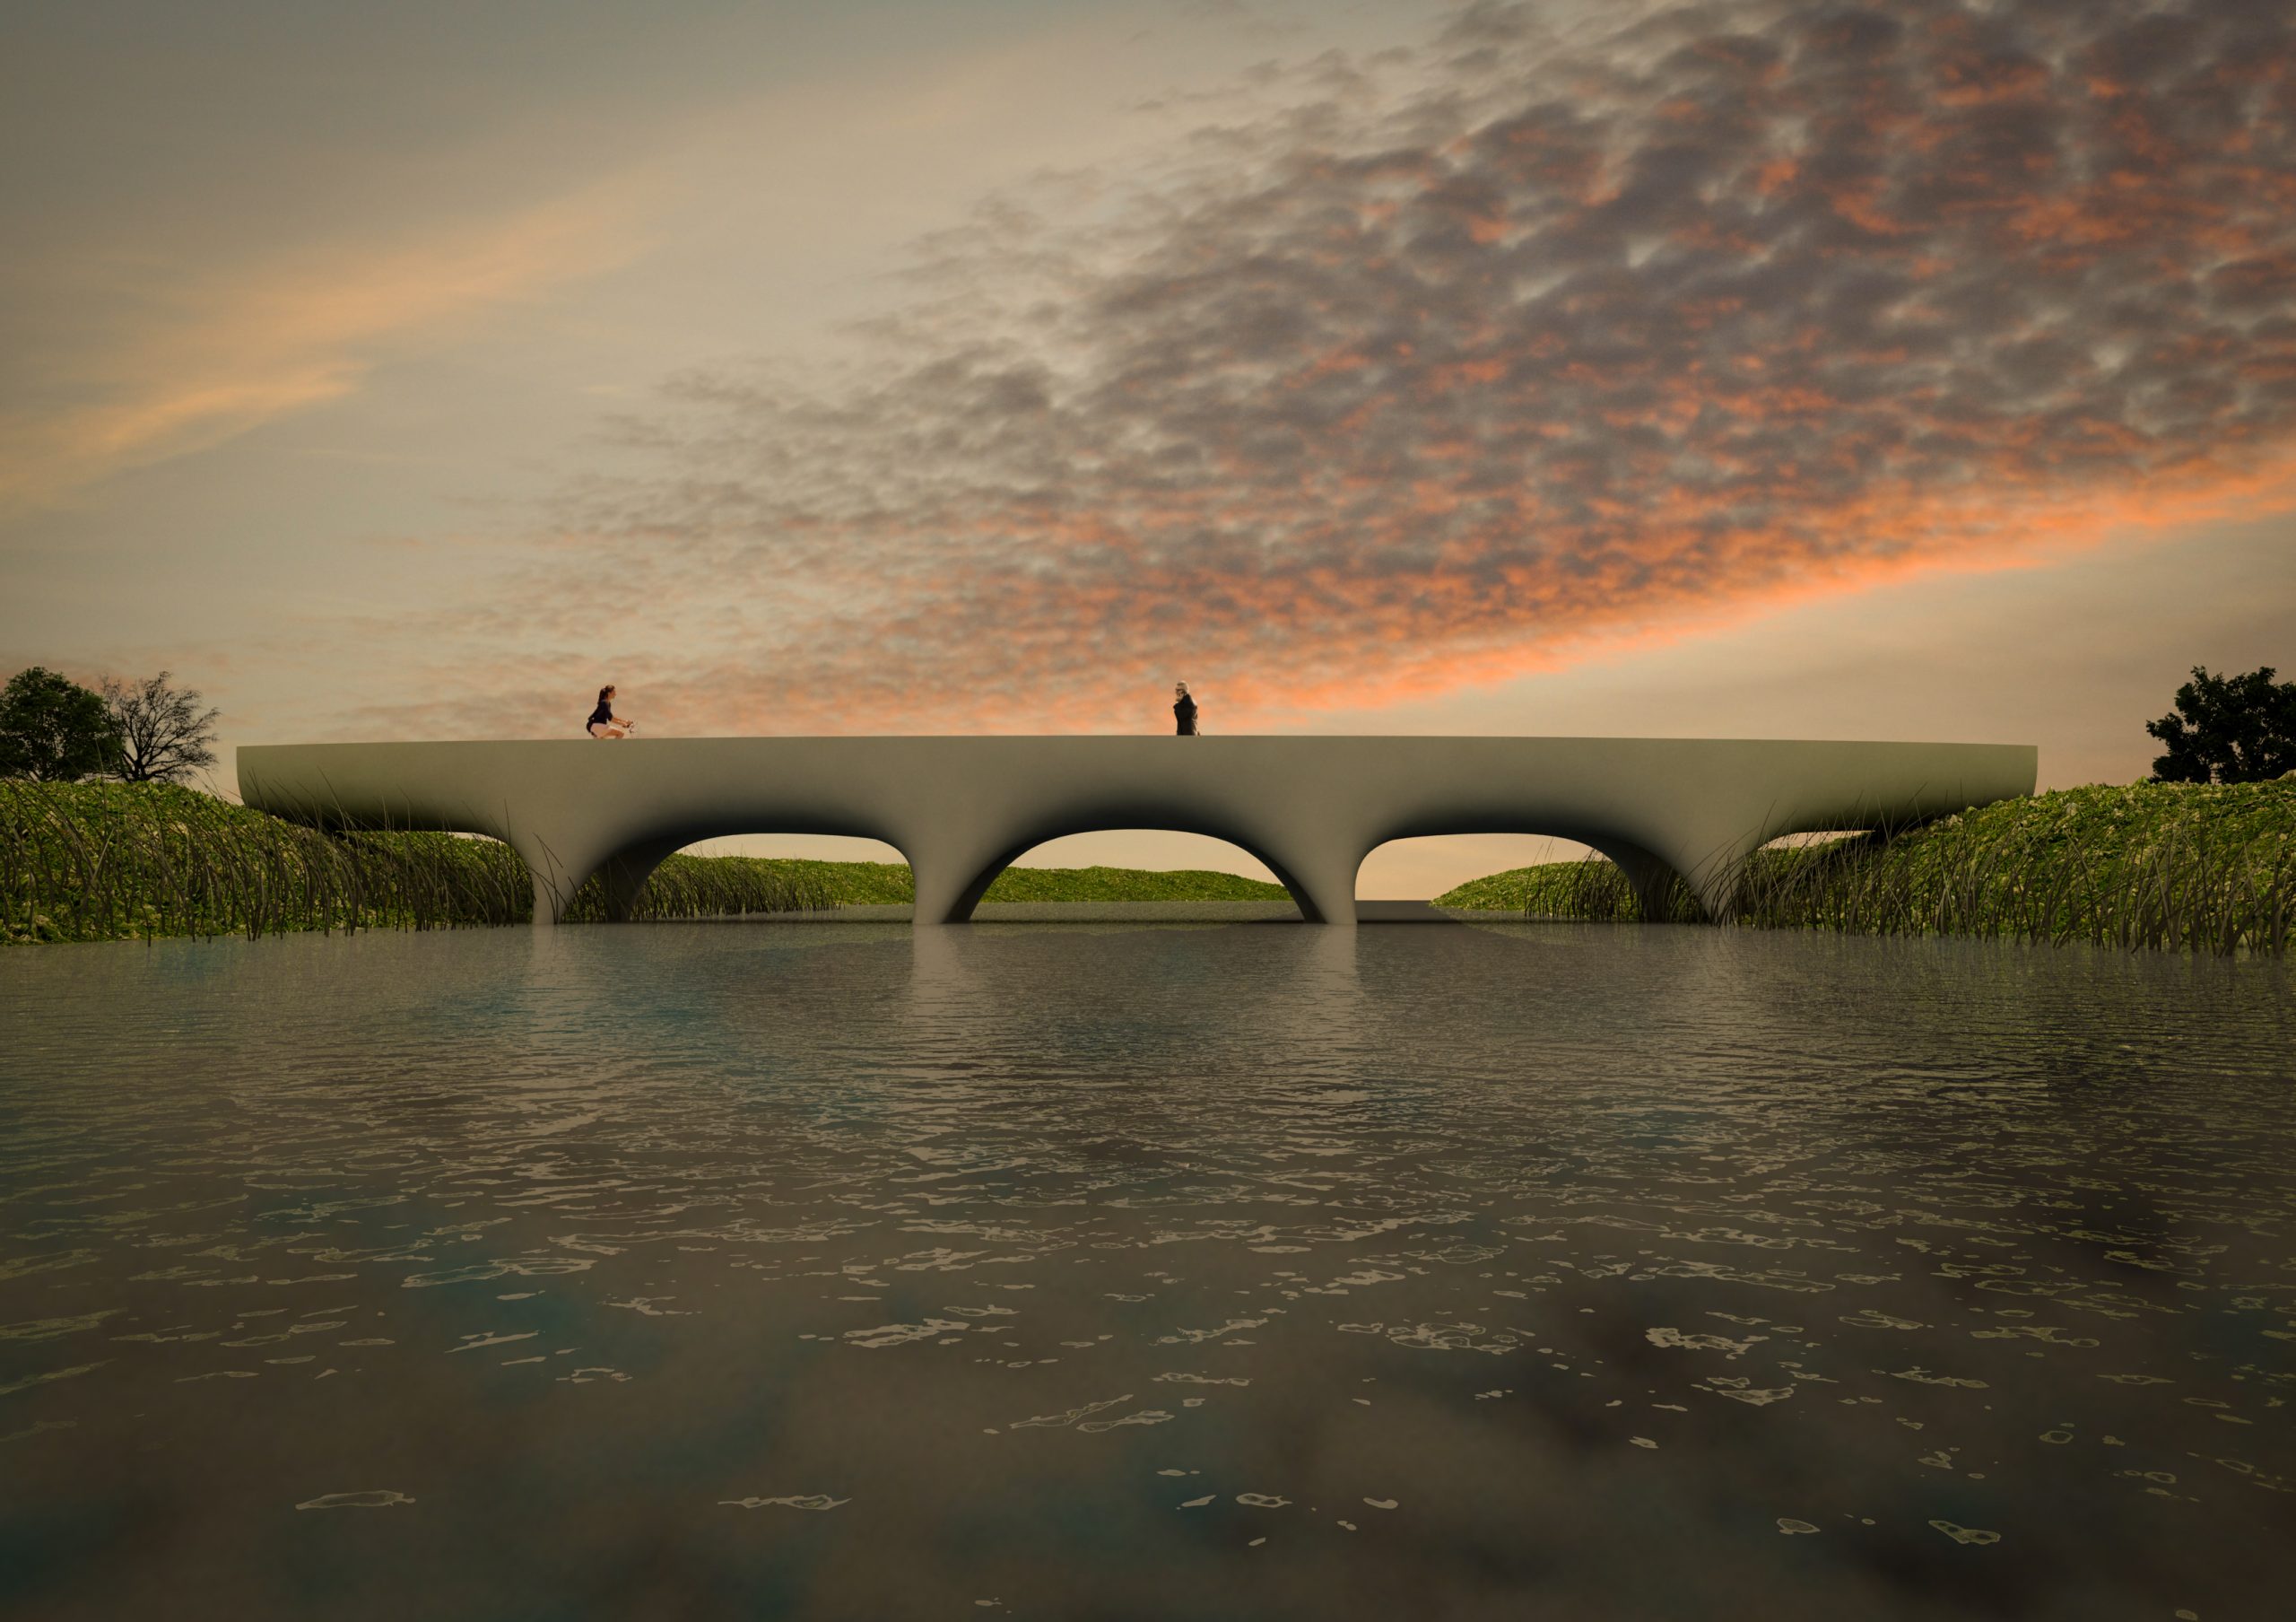 BAM and Weber Beamix are building the world's longest 3D printed ... - The Final Design For The BriDge. Image Via The BriDge Project. ScaleD